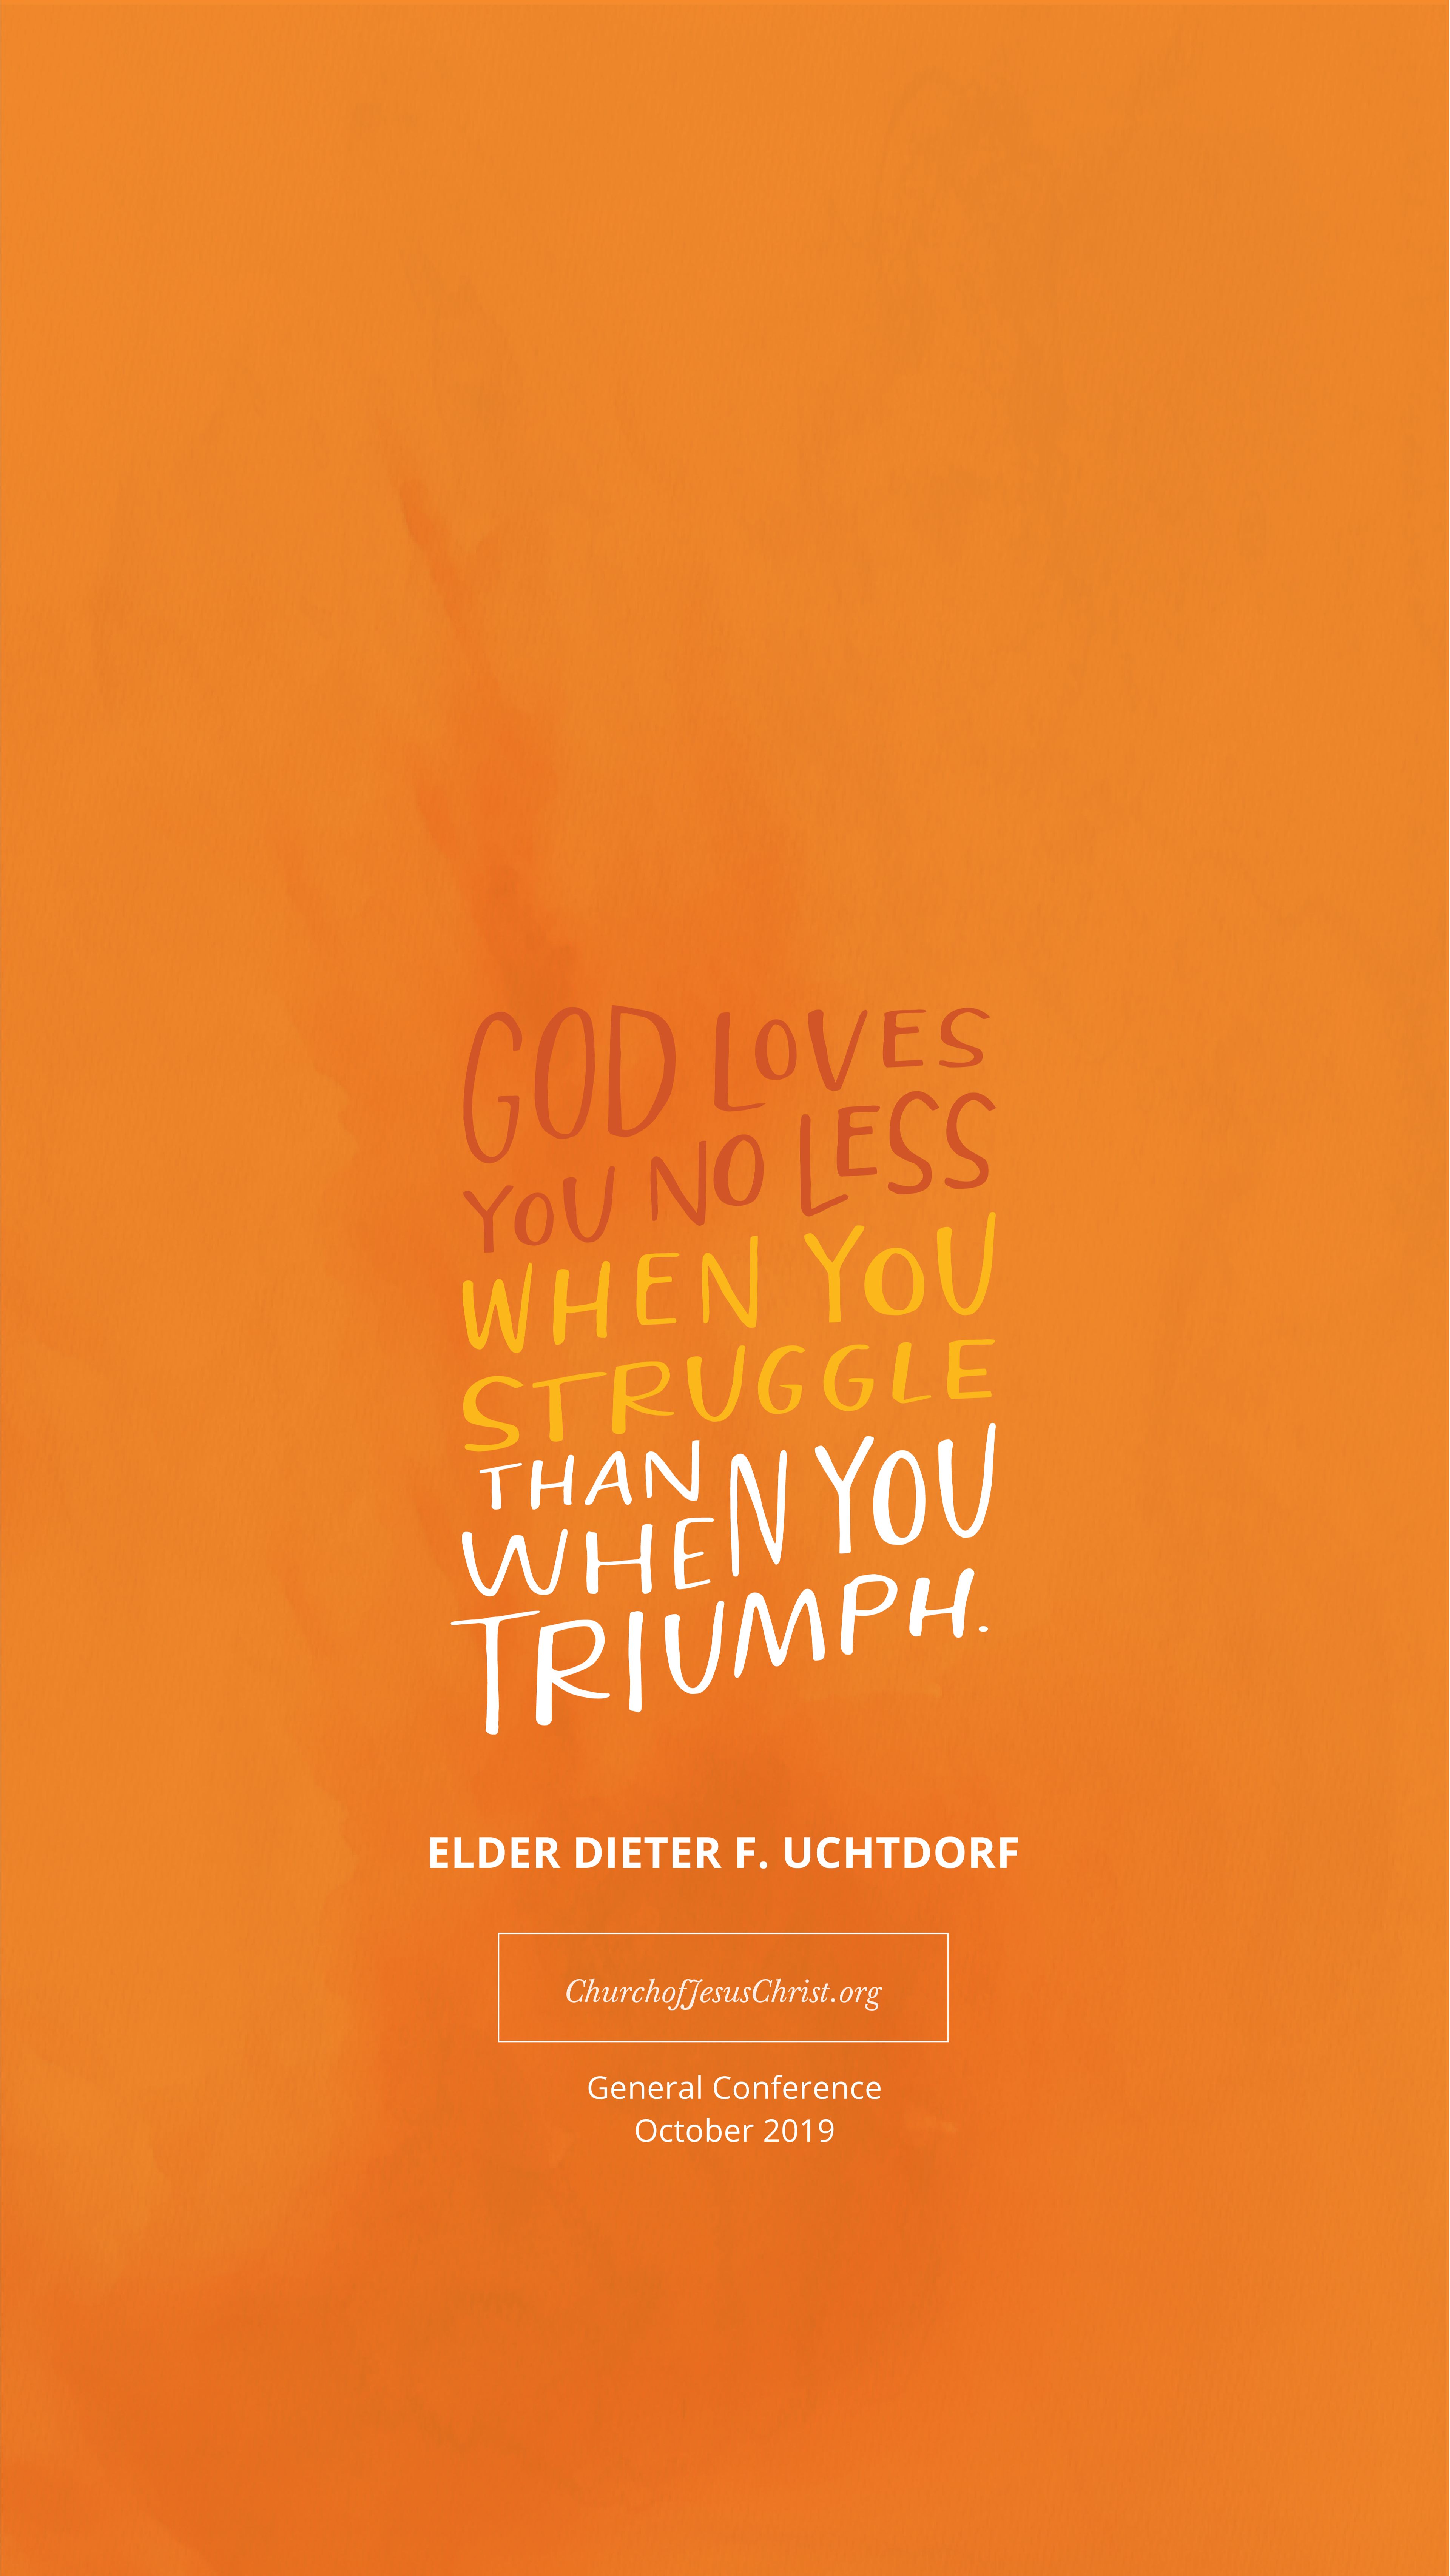 "God loves you no less when you struggle than when you triumph." |  Dieter F. Uchtdorf 